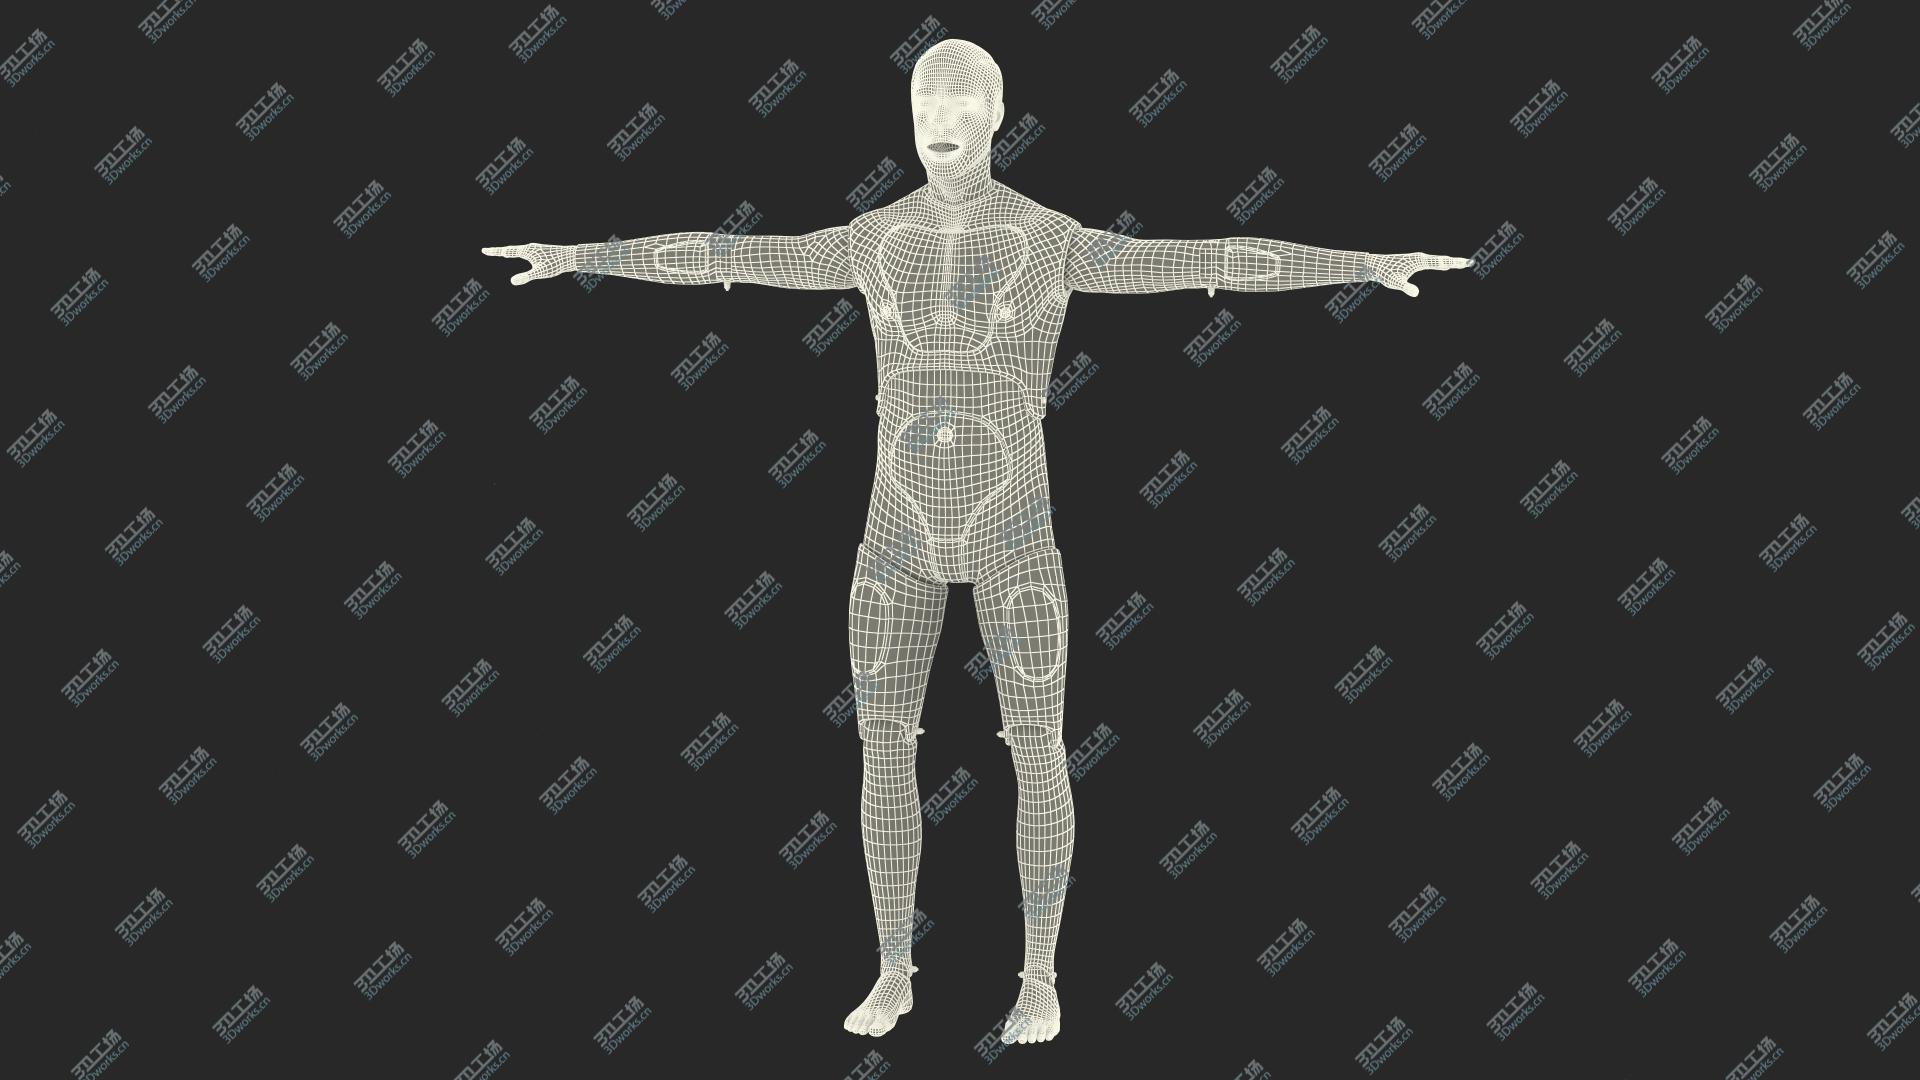 images/goods_img/2021040235/First Aid Training Manikin T-Pose 3D/4.jpg